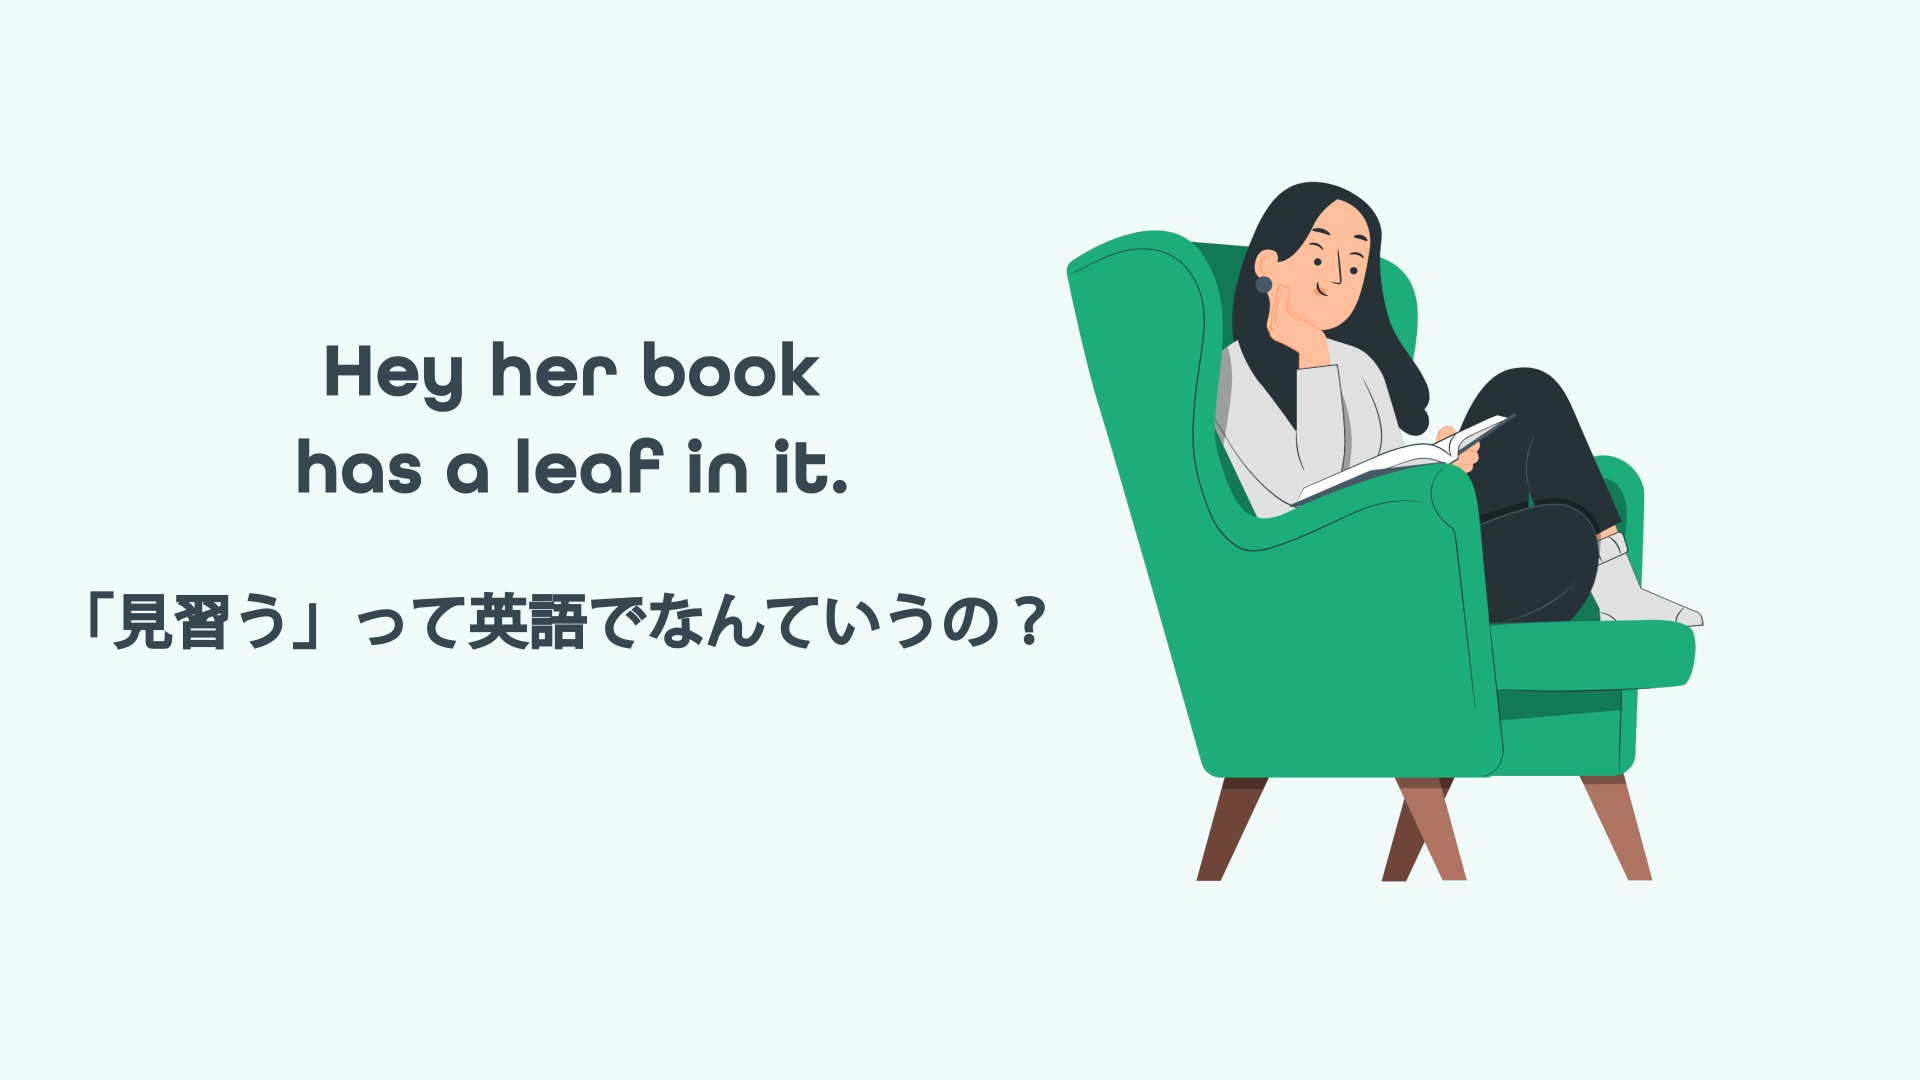 Hey her book has a leaf in it.　「見習う」って英語でなんていうの？